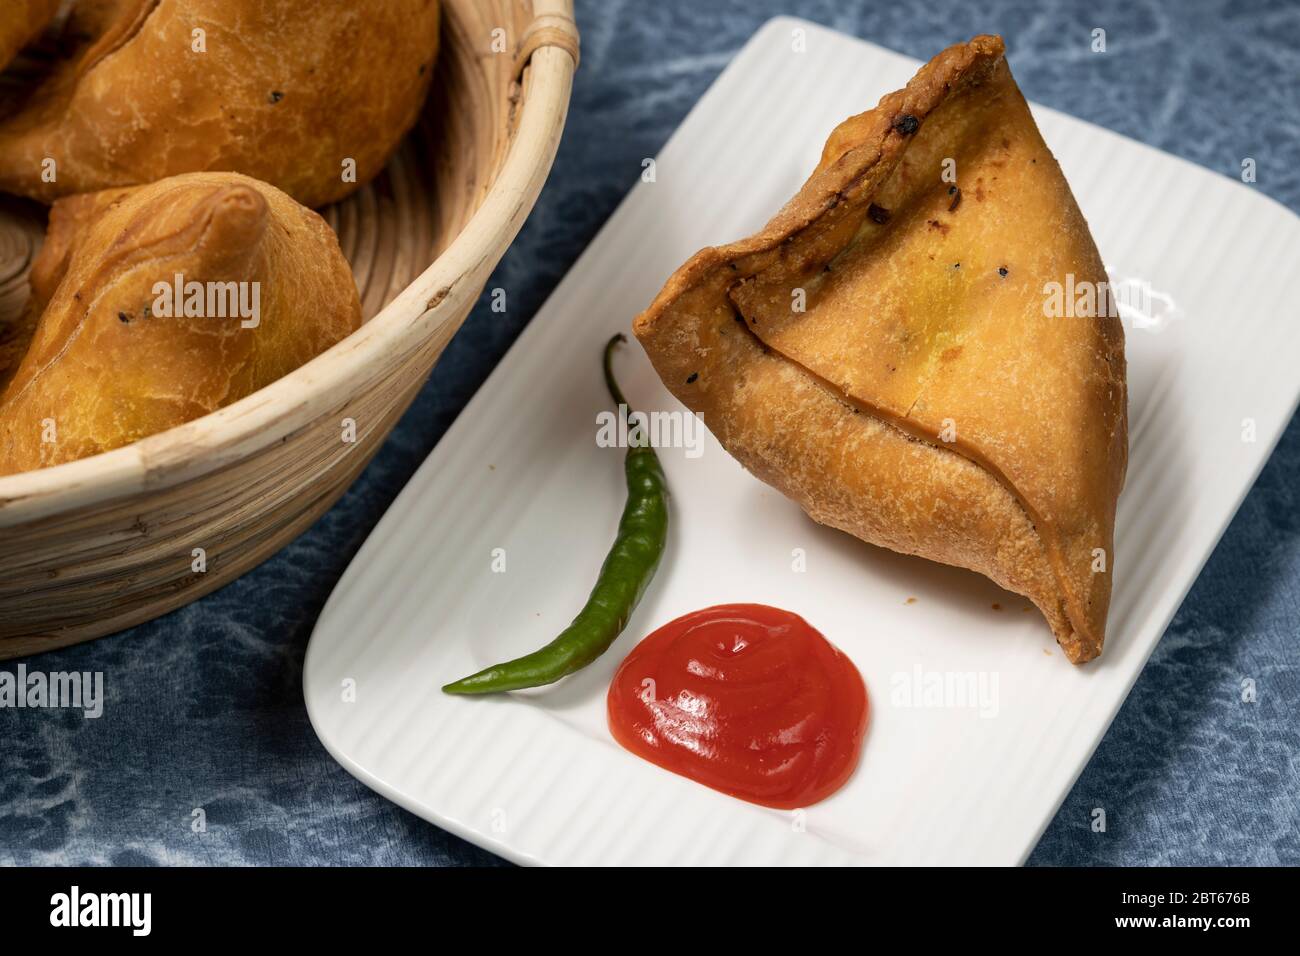 Punjabi Samosa, a snack filled with mashed potato deep fried a tasty snack preferred by most indians Stock Photo